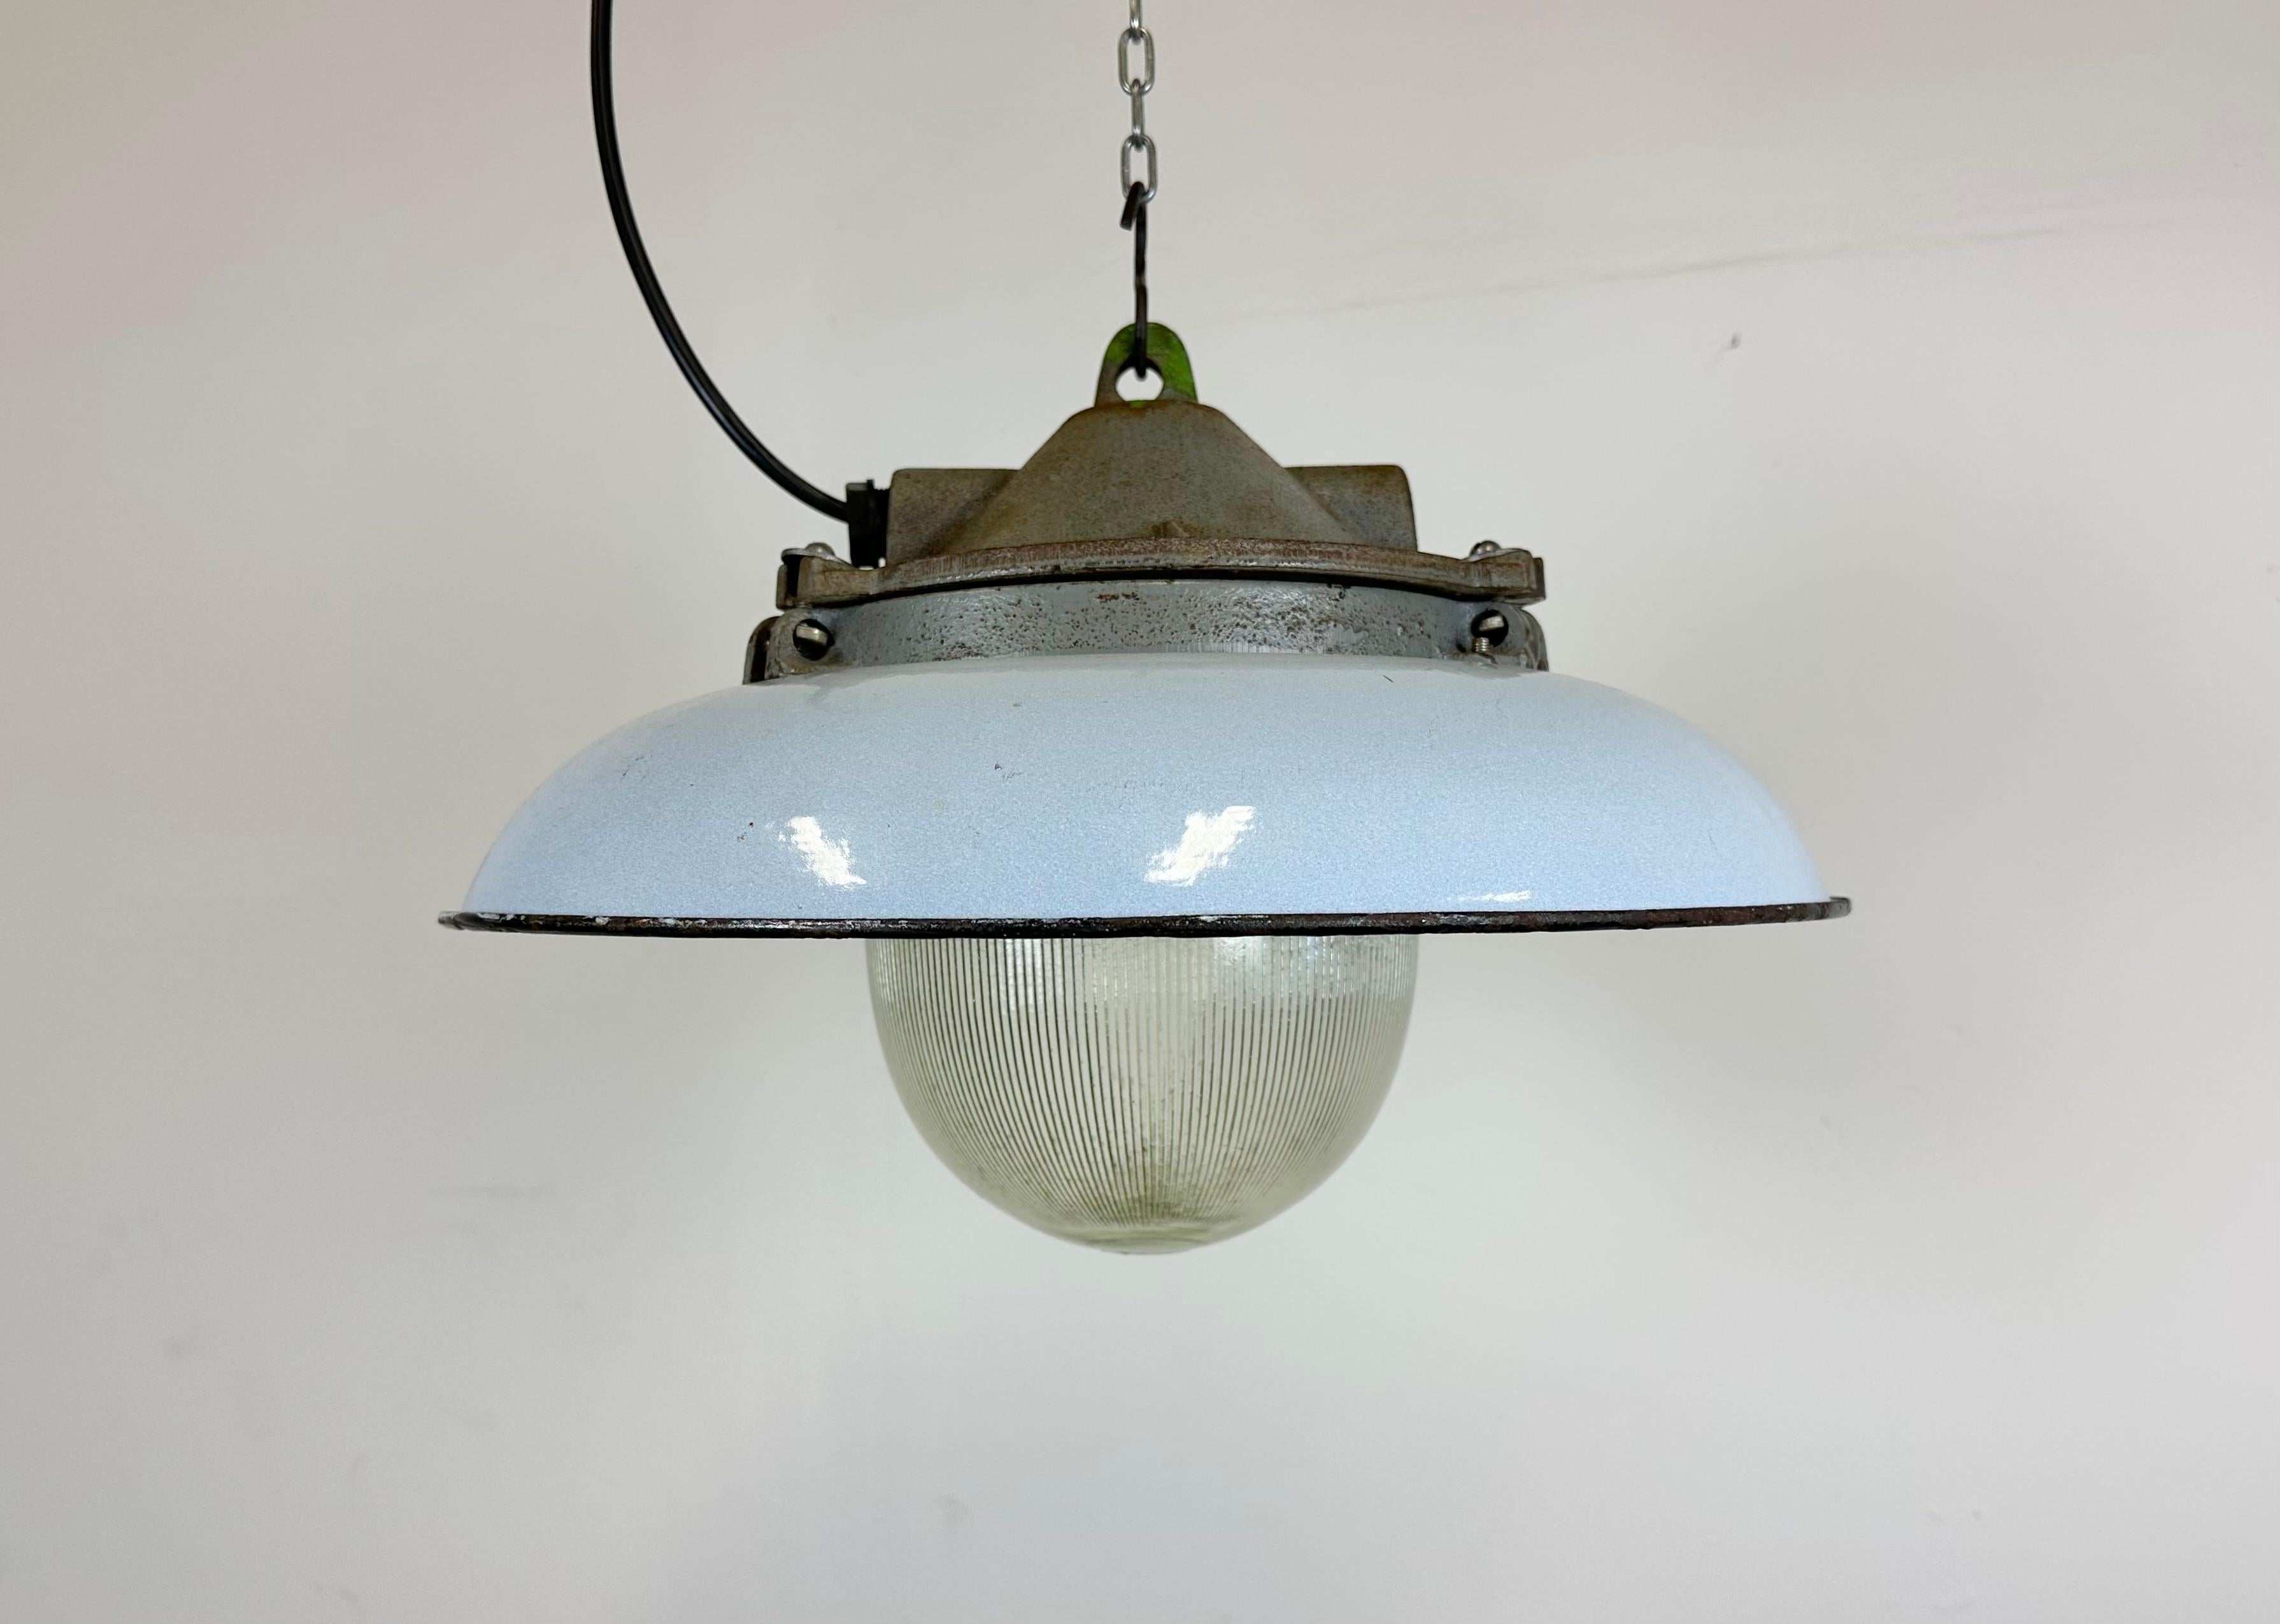 - Industrial factory pendant lamp in cast iron
- Manufactured by Zaos in Poland during the 1960s
- Light blue enamel shade with white enamel interior 
- Holophane glass cover
- Weight: 6,8 kg.